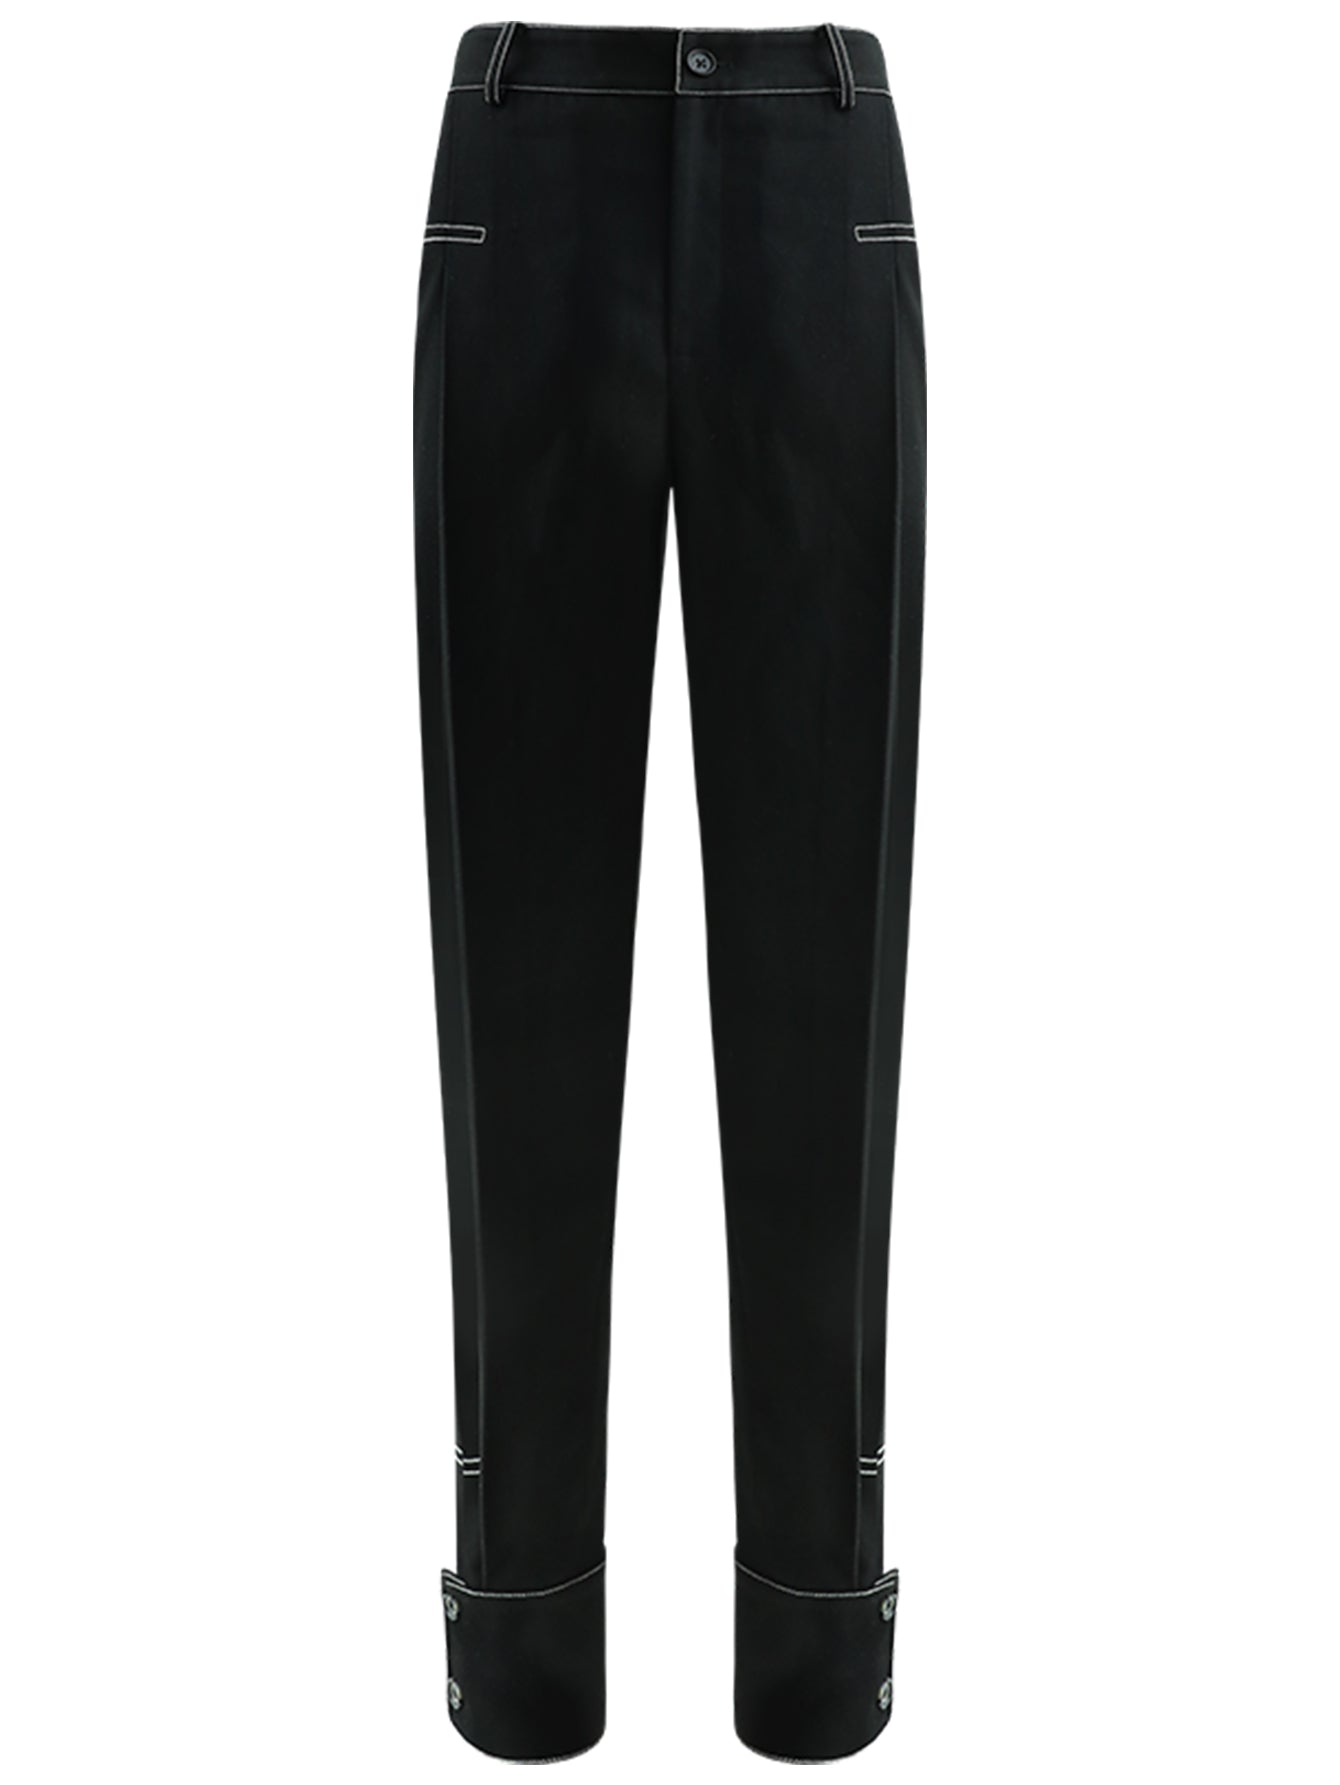 stylish-black-pants-with-front-ankle-slits_all_black_4.jpg